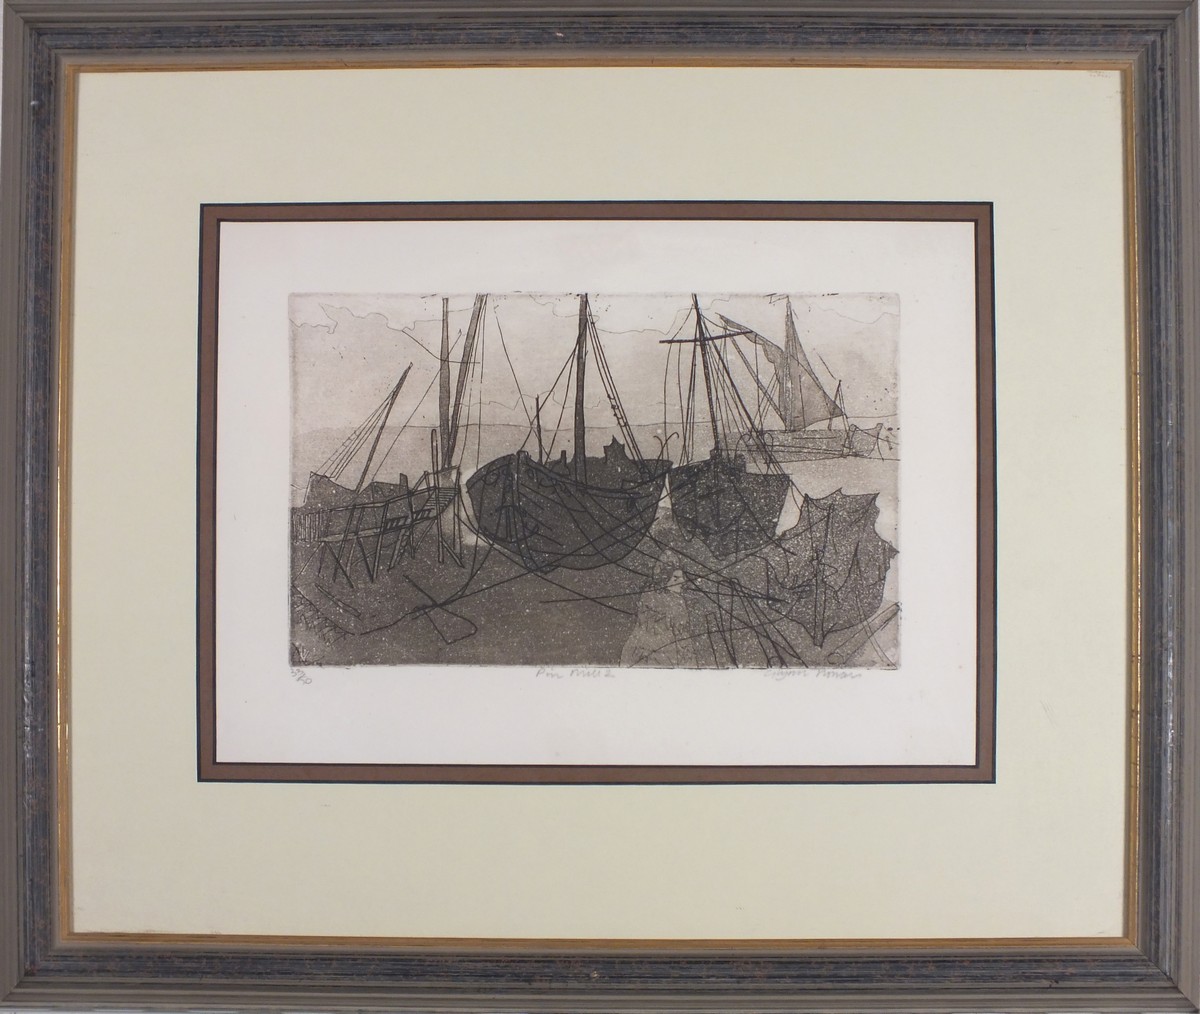 Glynn THOMAS (British b. 1946) Pin Mill 2, Etching, Signed lower right, inscribed and numbered 33/ - Image 2 of 3